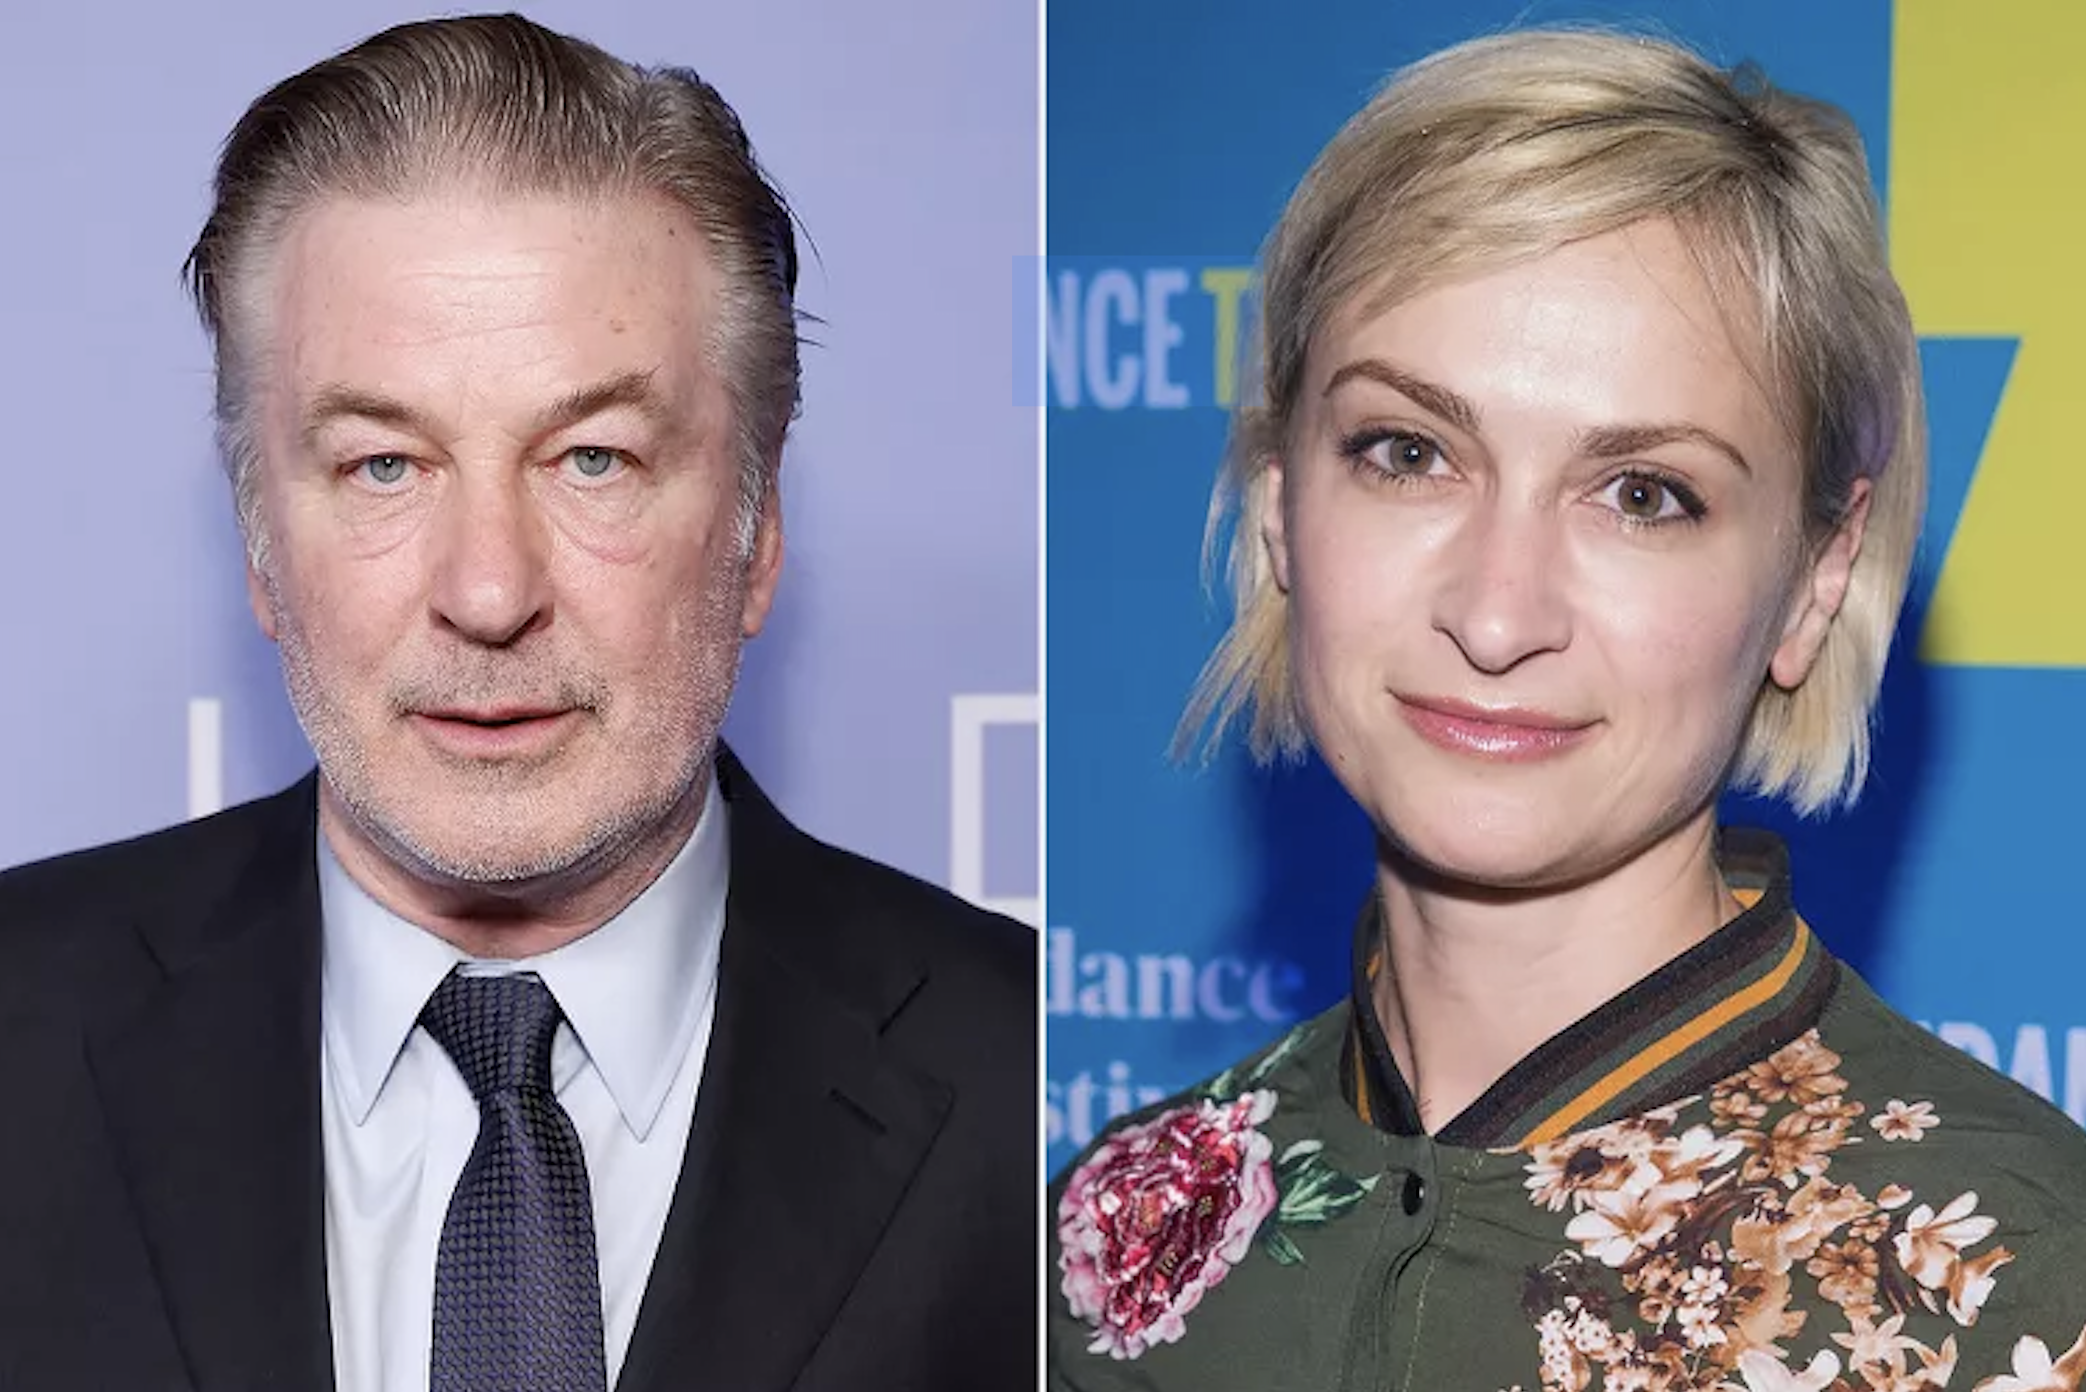 Alec Baldwin Could Still Be Charged Over ‘Rust’ Shooting After Expert Concludes He Pulled the Trigger